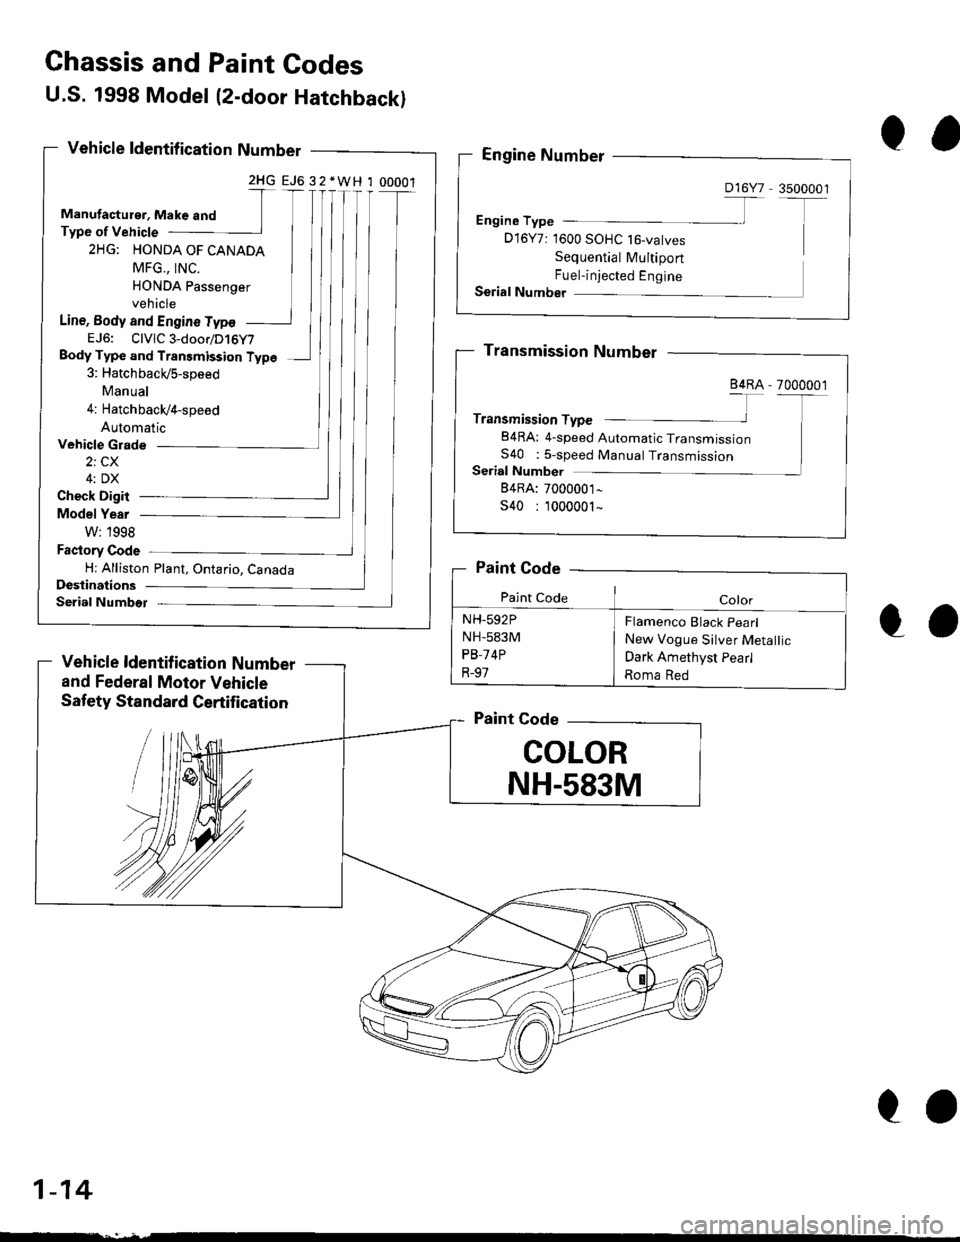 HONDA CIVIC 1997 6.G User Guide Ghassis and Paint Godes
Vehicle Grade
2i CX
4: DX
Check Digit
Model Year
W: 1998
Factory Code
Hr Alliston Plant, Ontario, CanadaDeslinations
Serial Numbet
Vehicle ldentif ication Number
and Federal Mo